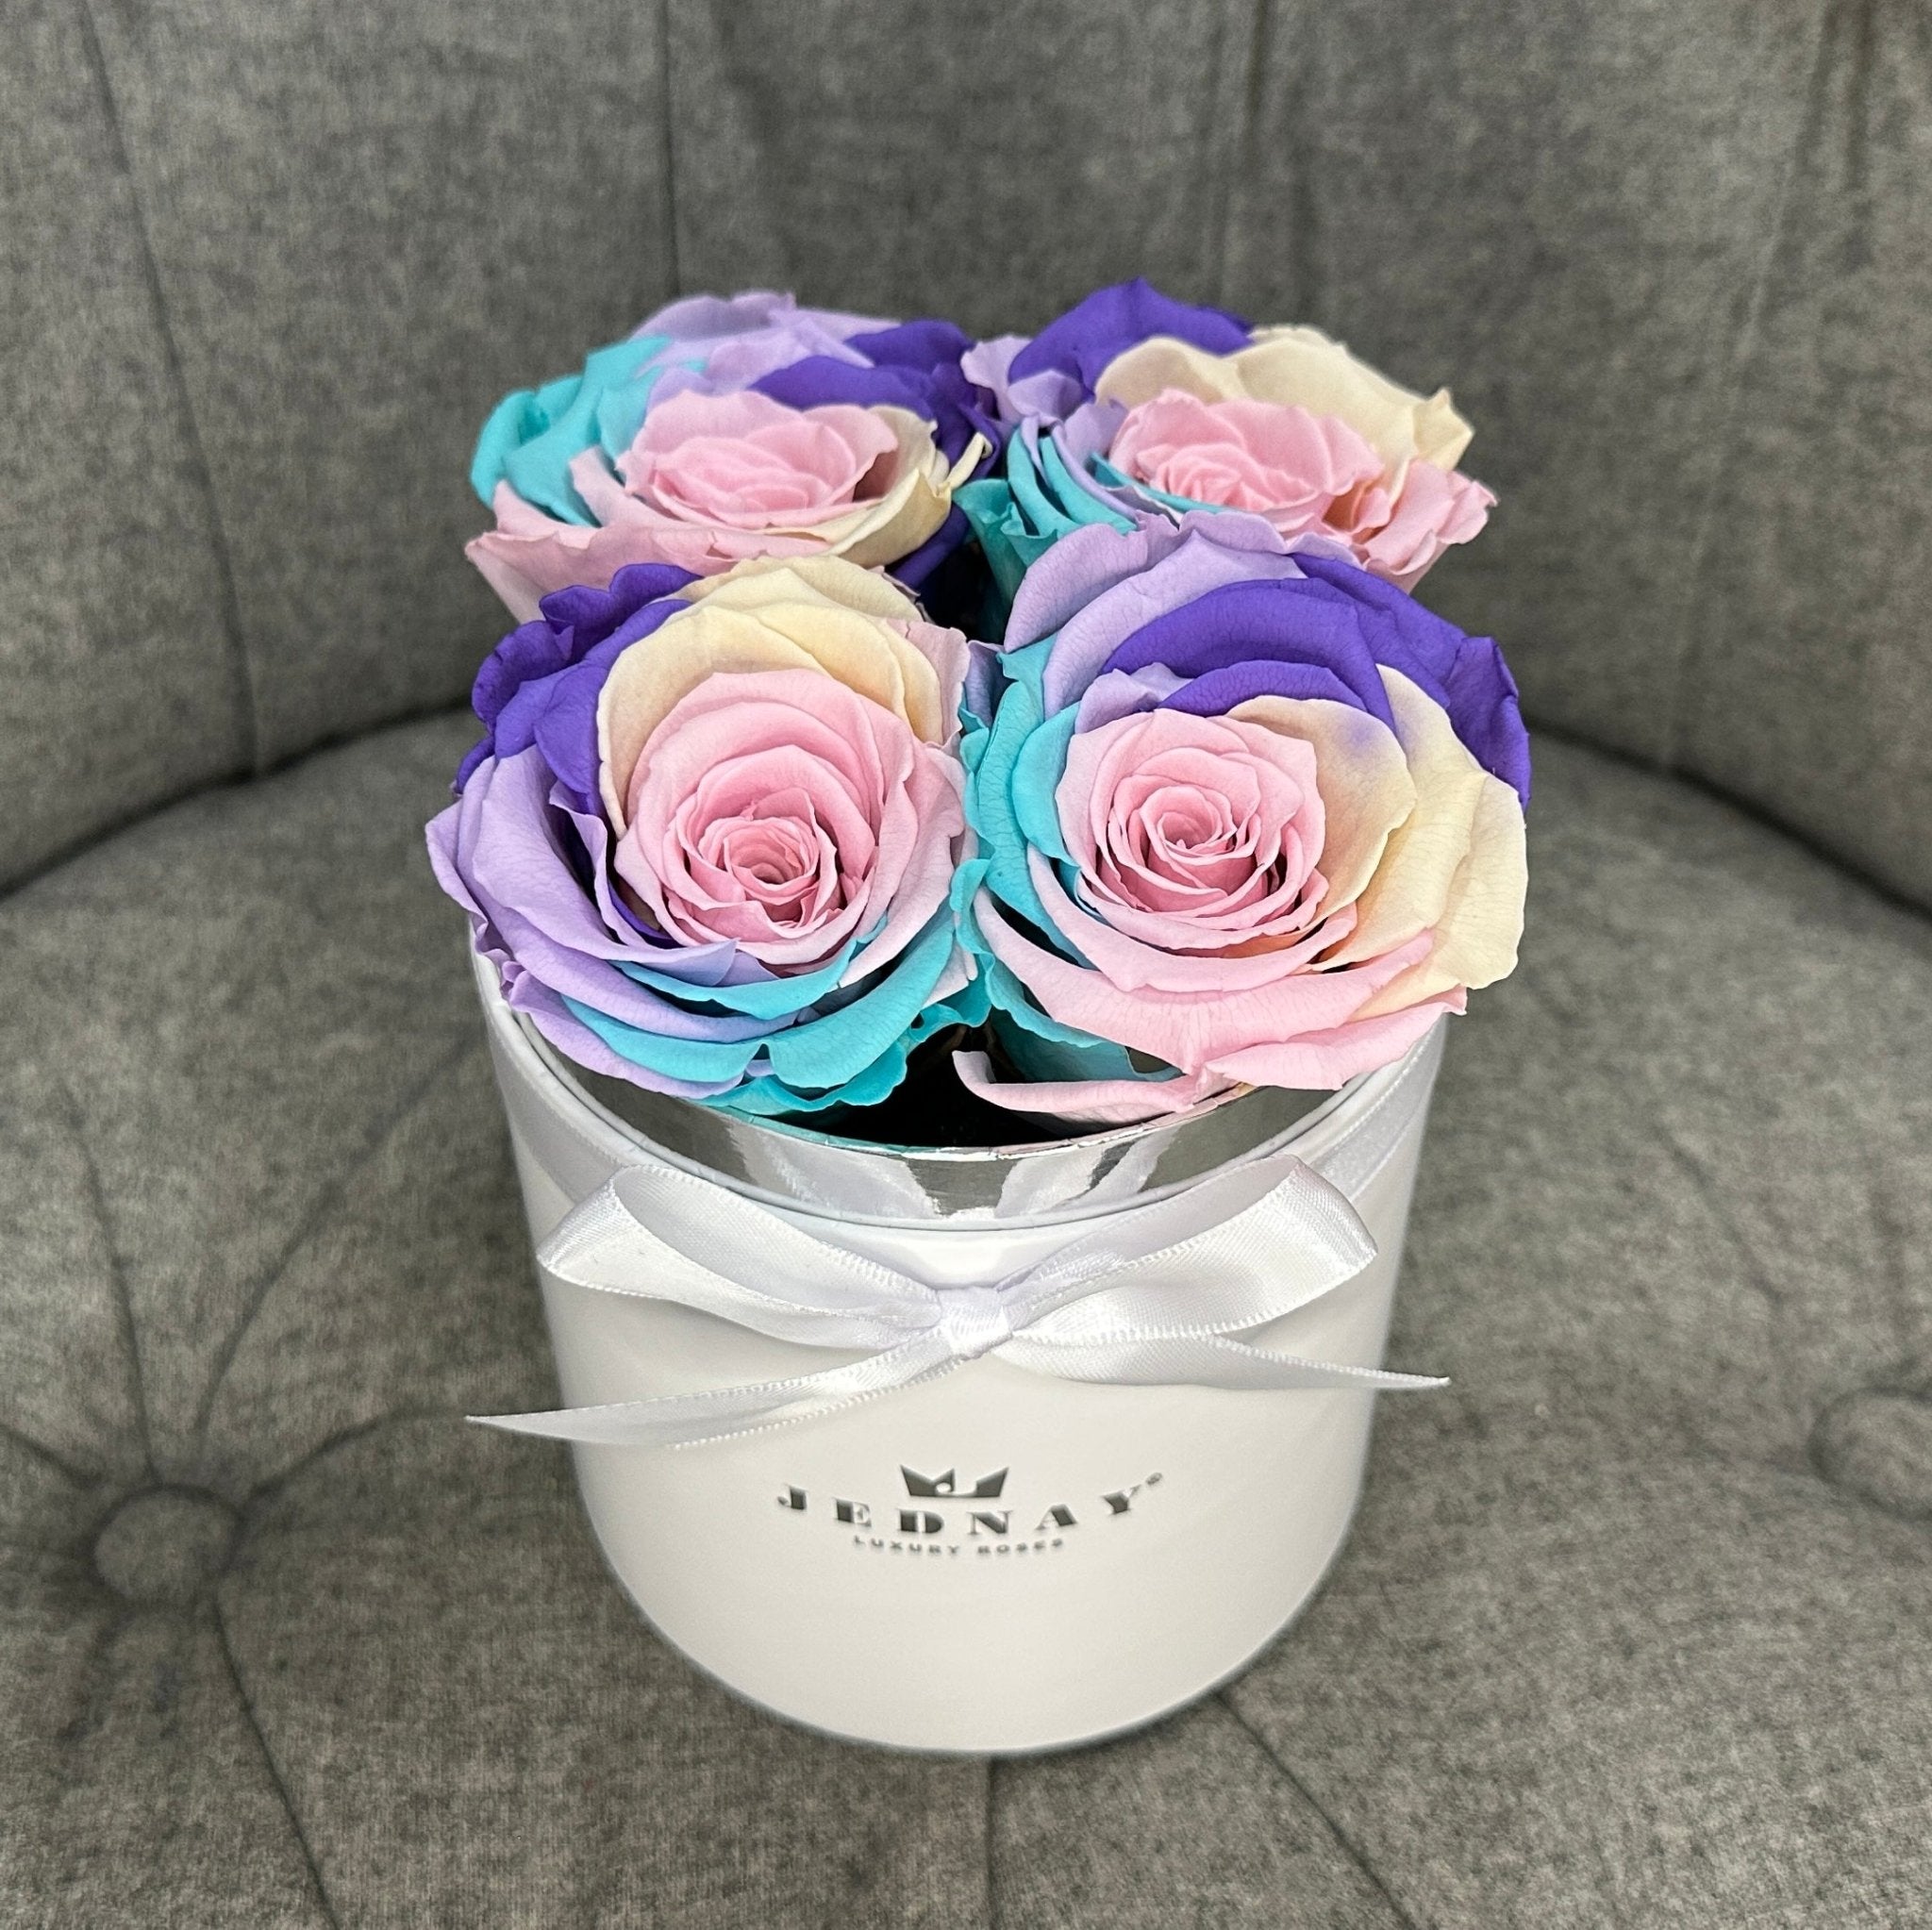 Petite Classic White Forever Rose Box - Over The Rainbow Eternal Roses - Jednay Roses